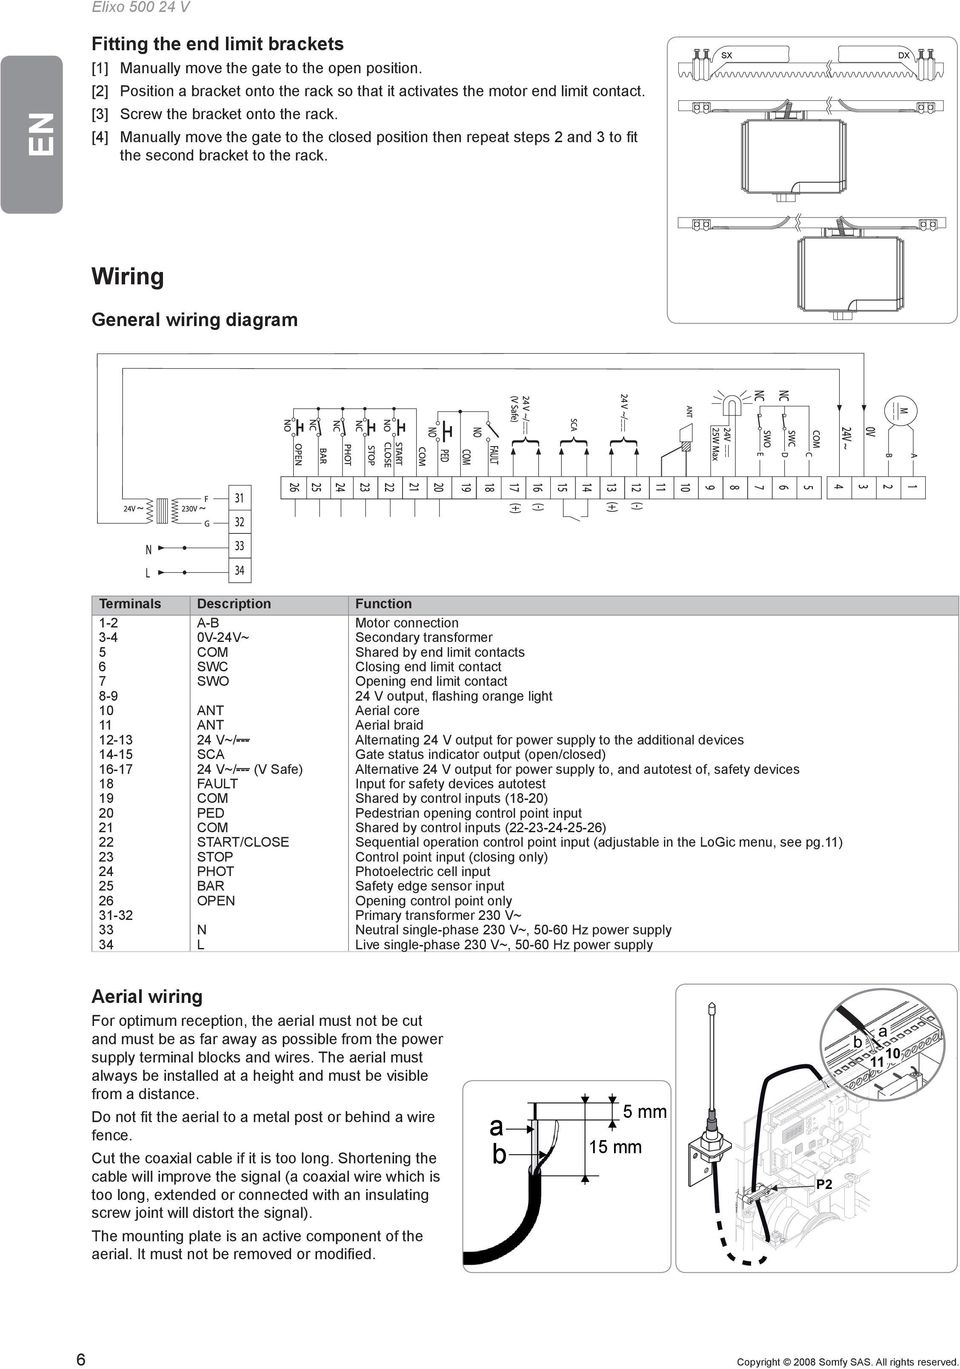 SX DX Wiring General wiring diagram Terminals Description Function 1-2 A-B Motor connection 3-4 0V-24V~ Secondary transformer 5 COM Shared by end limit contacts 6 SWC Closing end limit contact 7 SWO